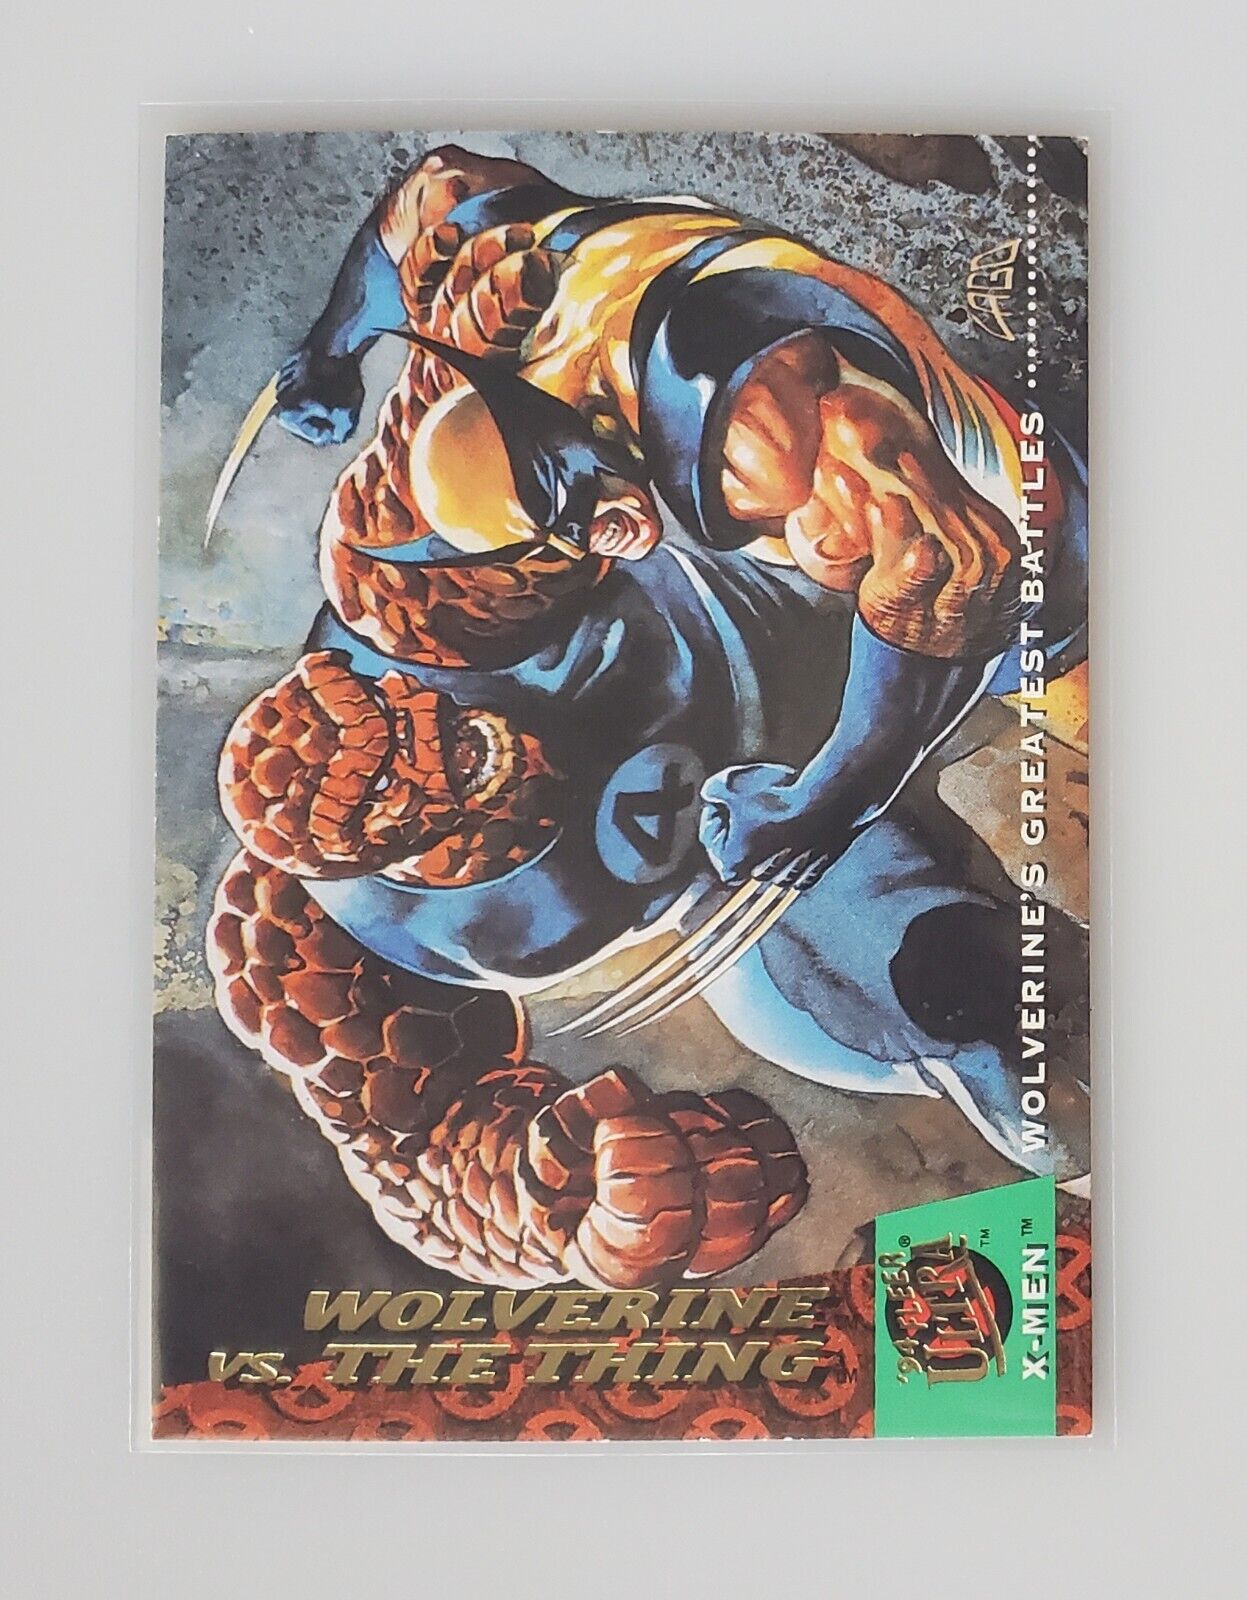 \'94 FLEER ULTRA X-MEN TRADING CARD 141 WOLVERINE VS THE THING BY RAY LAGO MARVEL